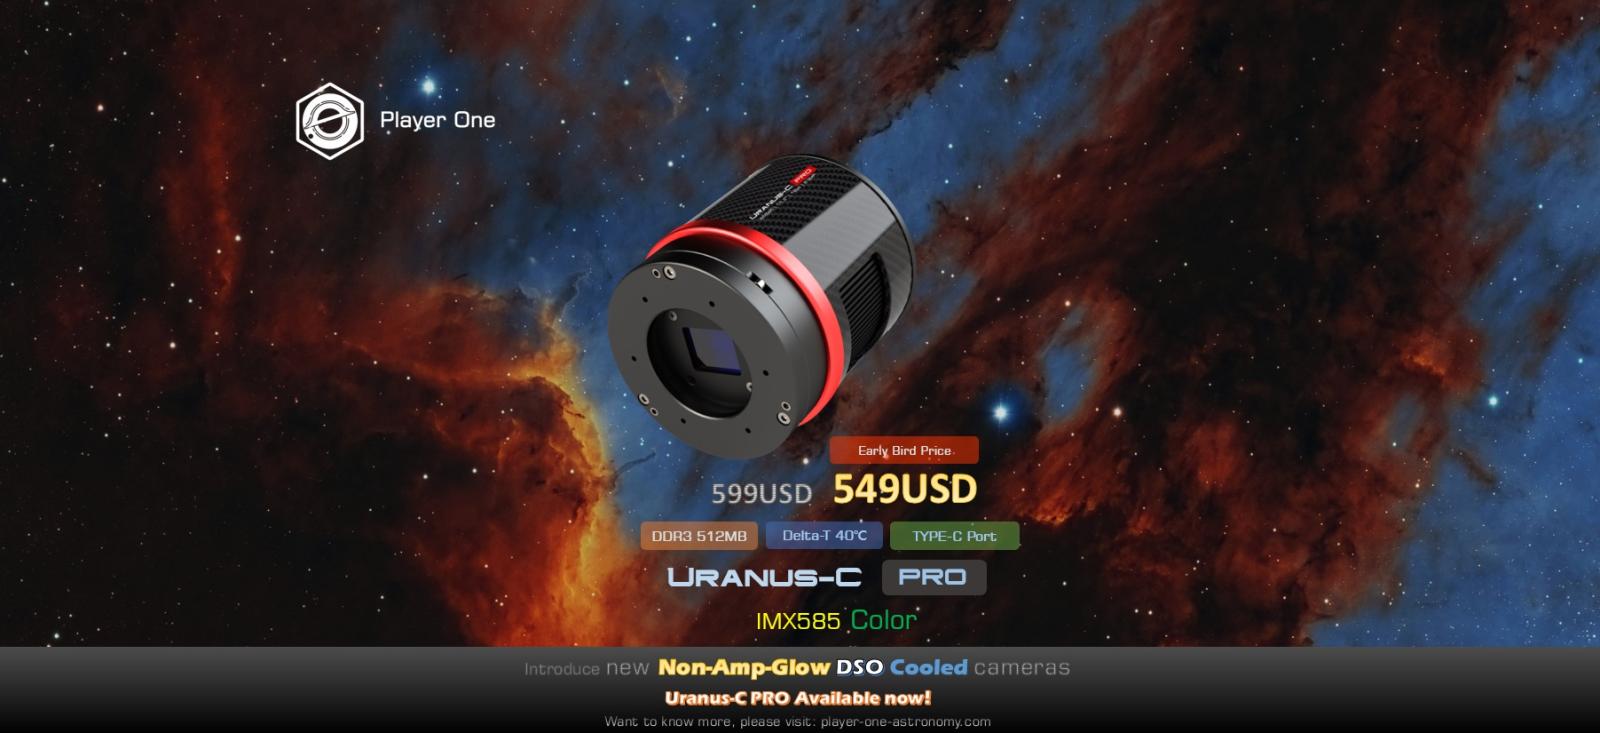 Player One release Uranus-C PRO, first IMX585 cooled camera in the